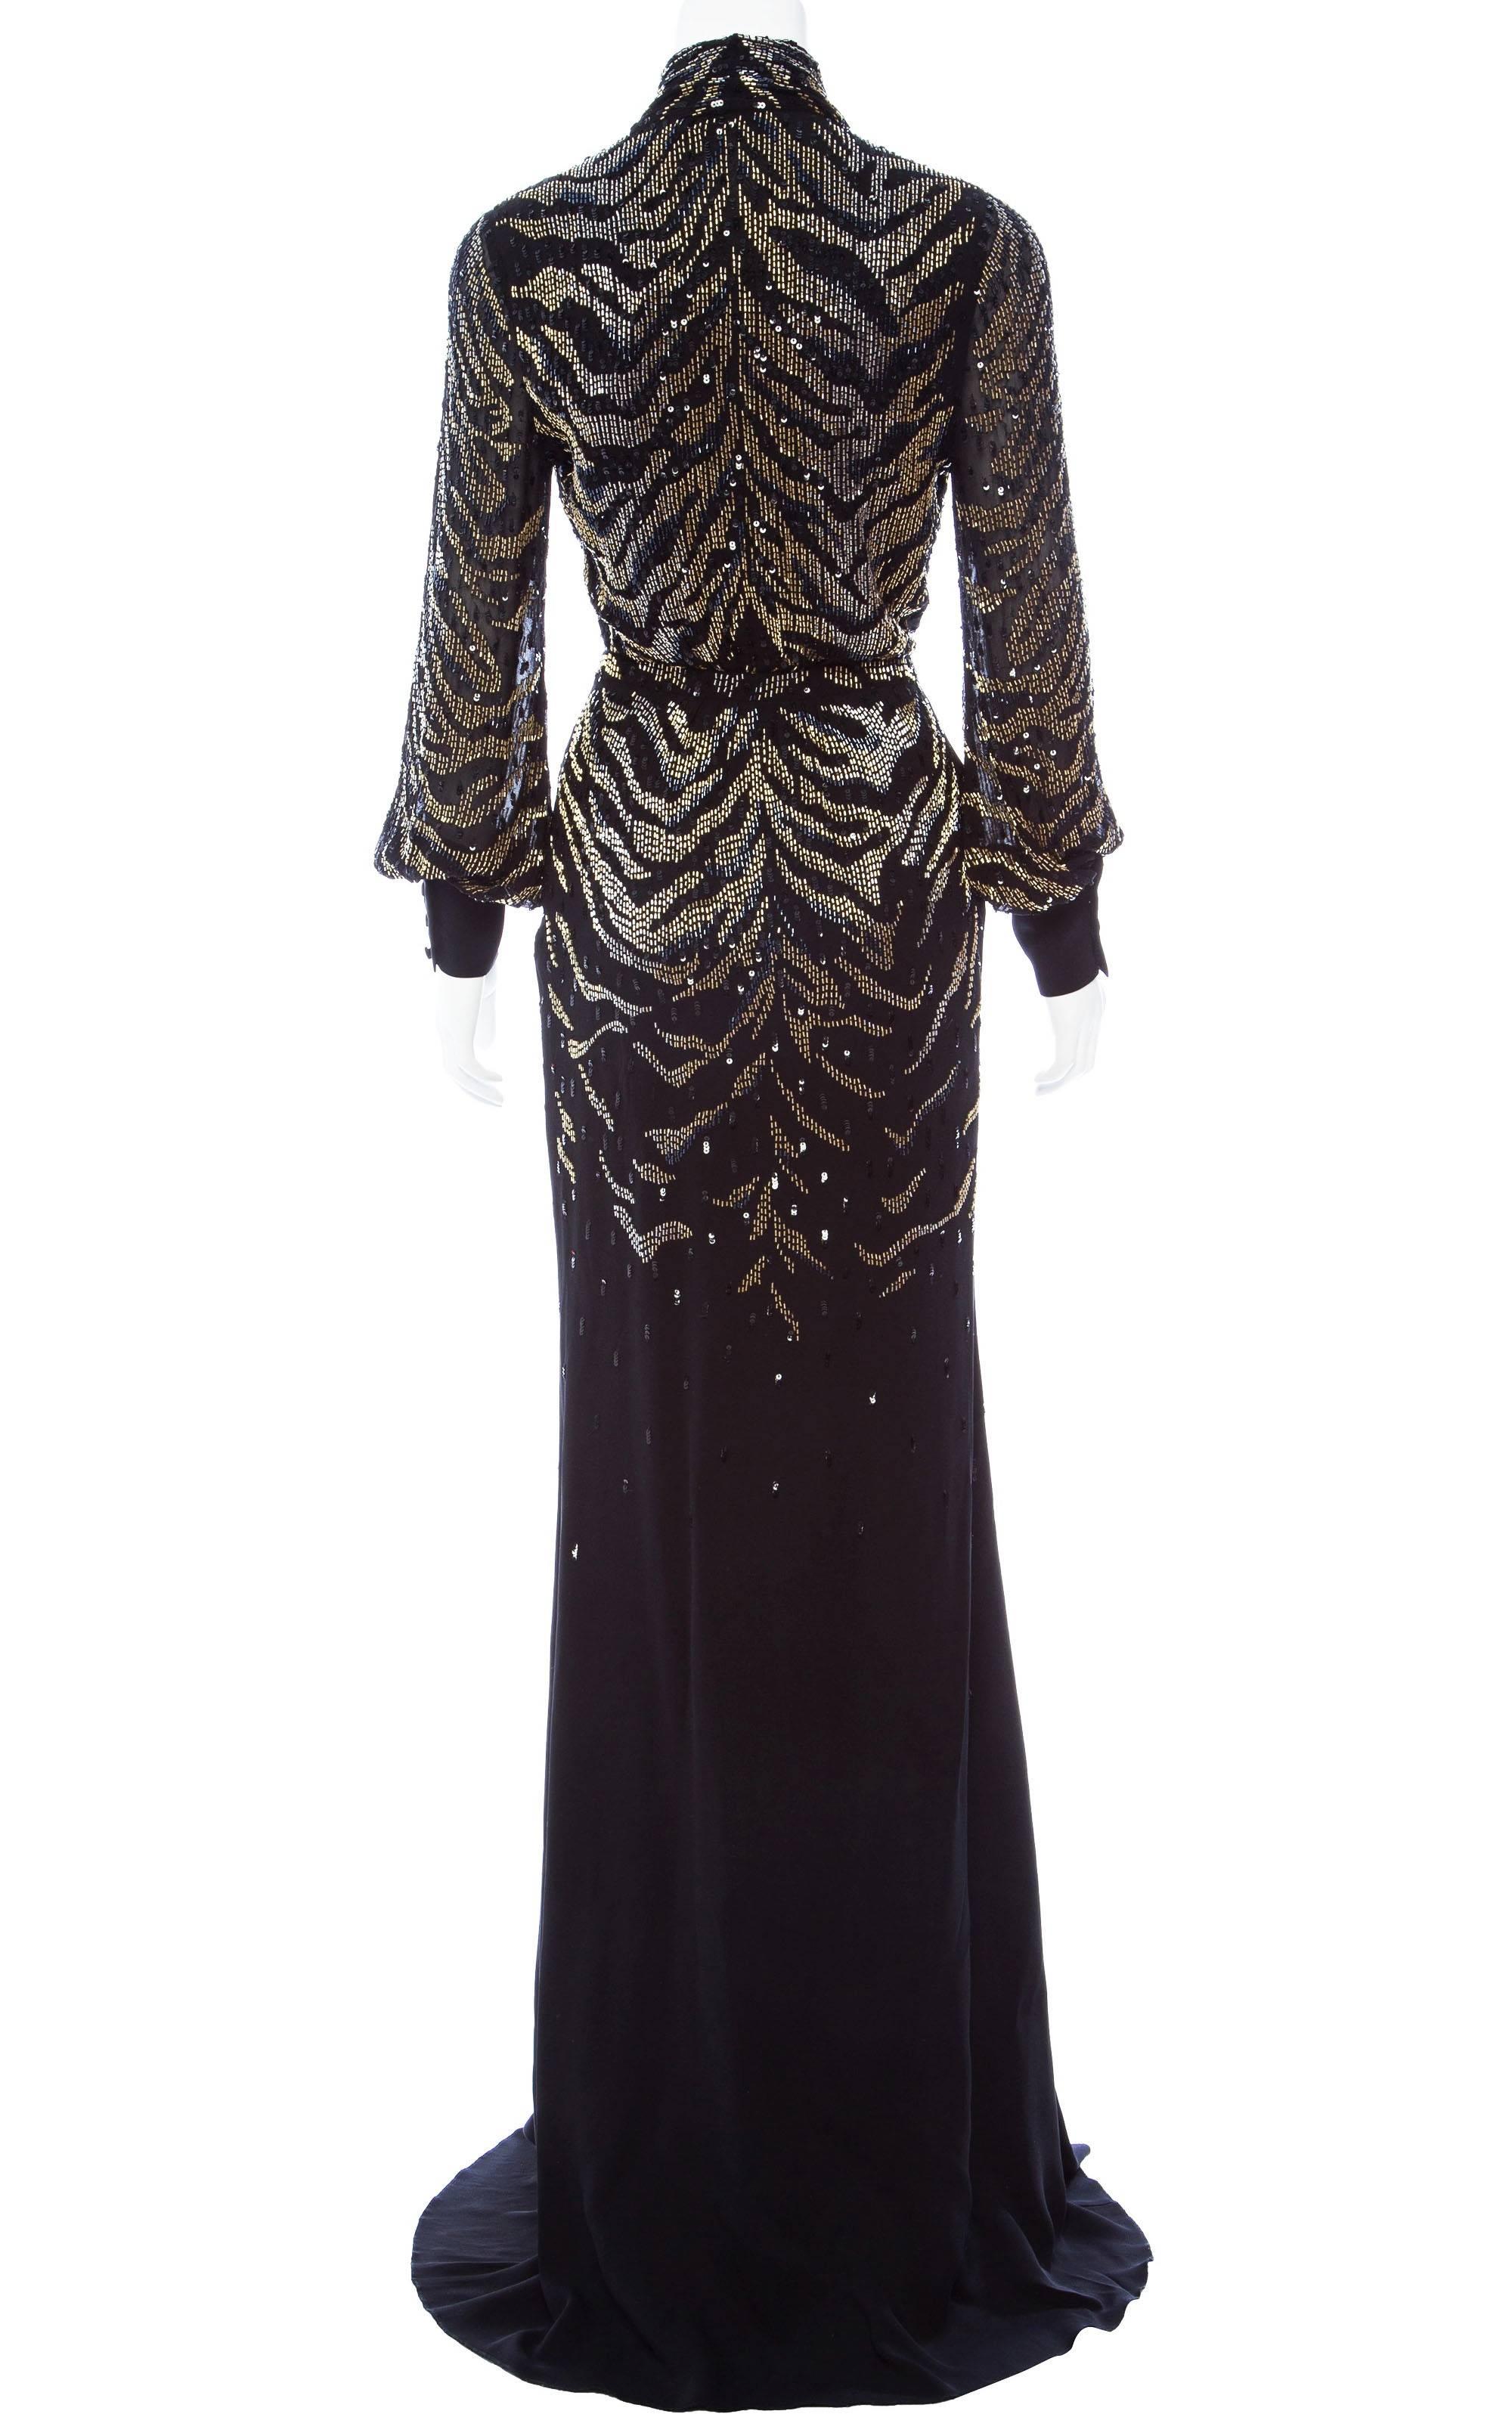 Roberto Cavalli Silk Embellished Kimono Dress. Italian size 38. Tiger pattern dazzling black dress with golden and metallic handcrafted beads. Classy and chic, this Kimono style design is presented with a high leg slit at the front for a dangerous